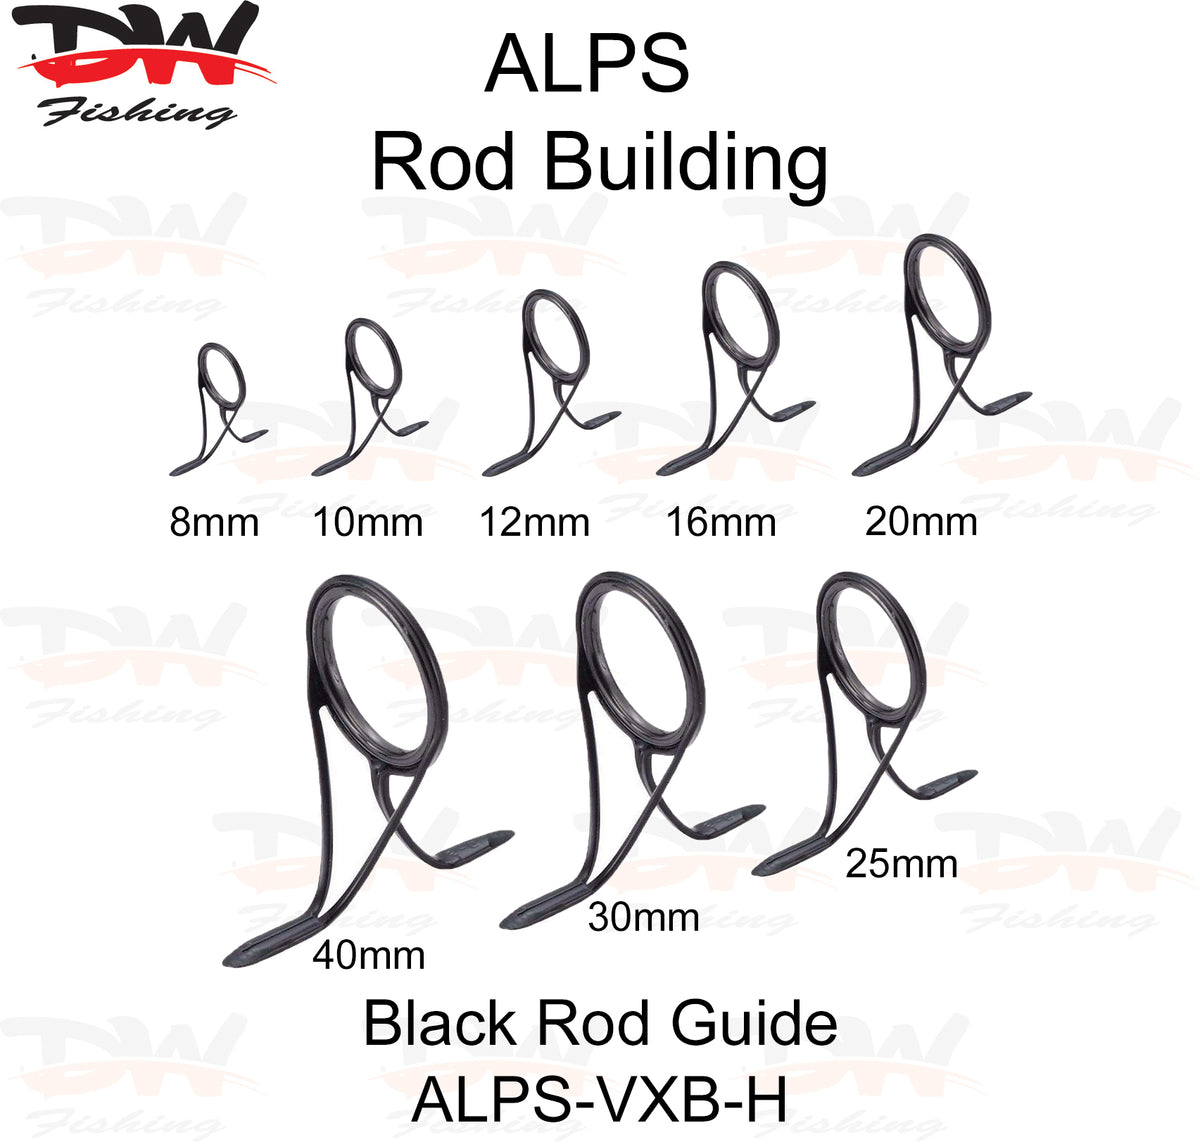 ALPS Rod Guide 316 Stainless Steel, Rod Building